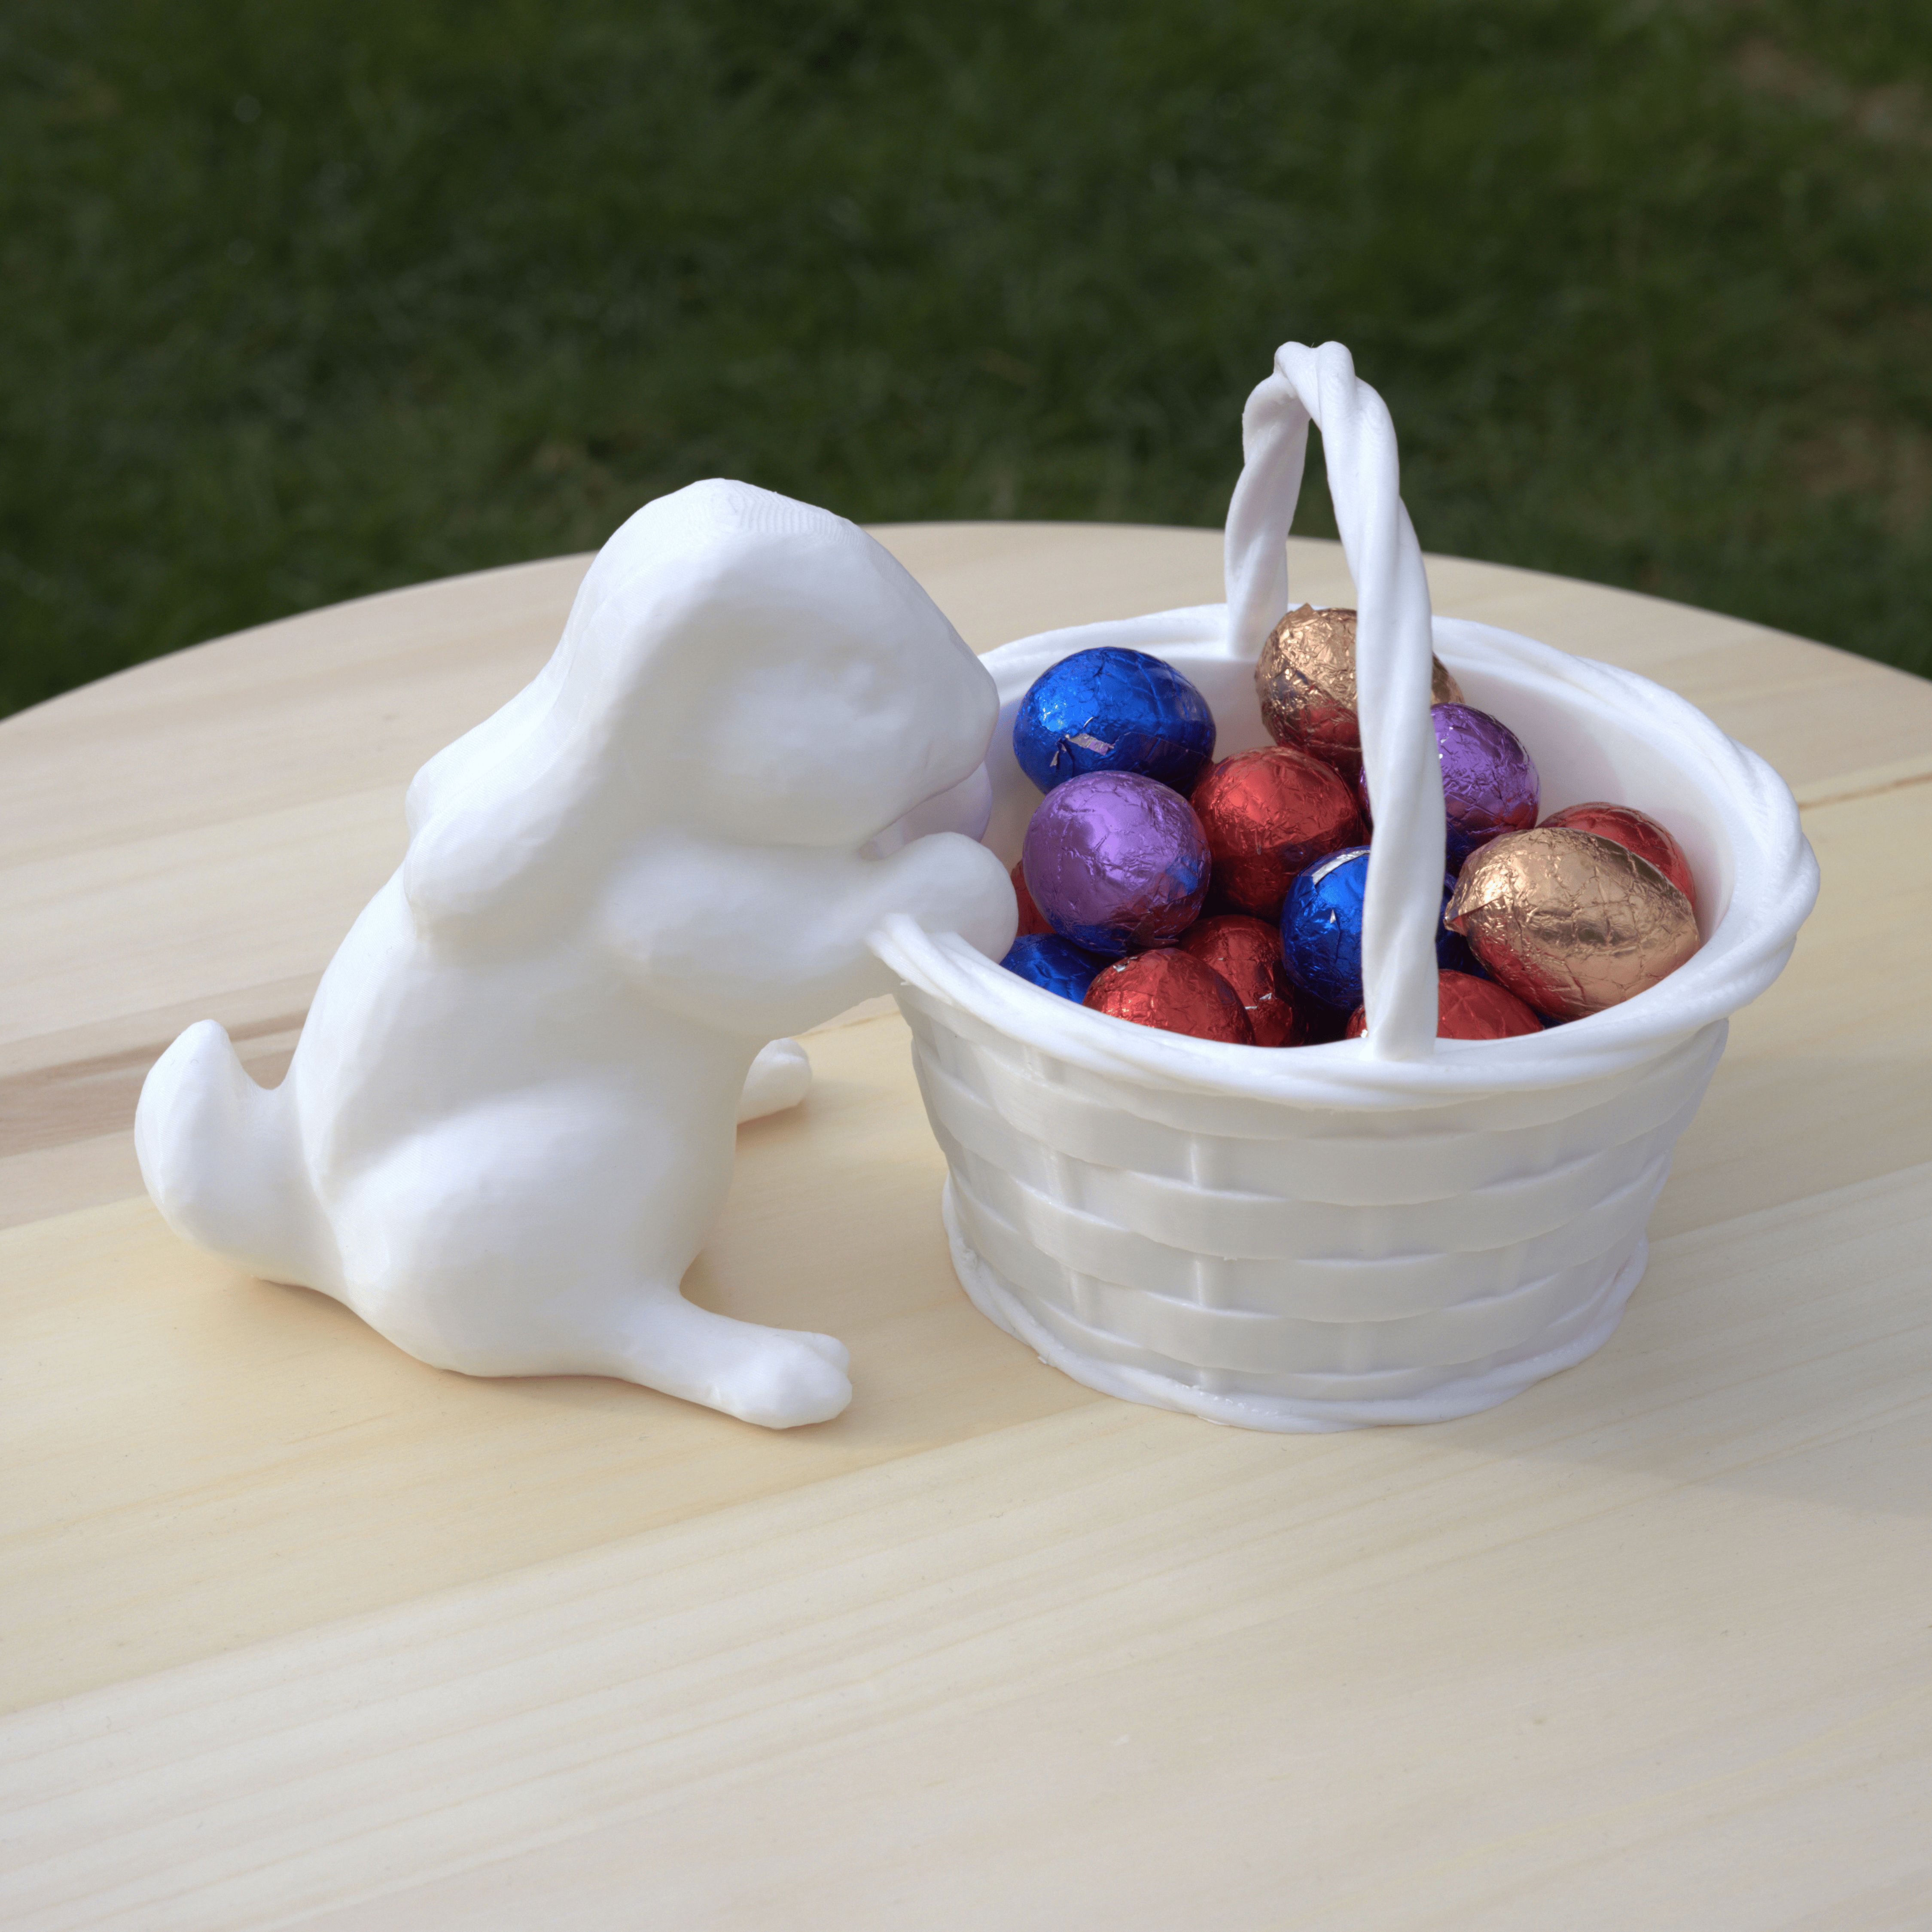 BEAUTIFUL EASTER BUNNY WITH CUTE BASKET FOR EGGS